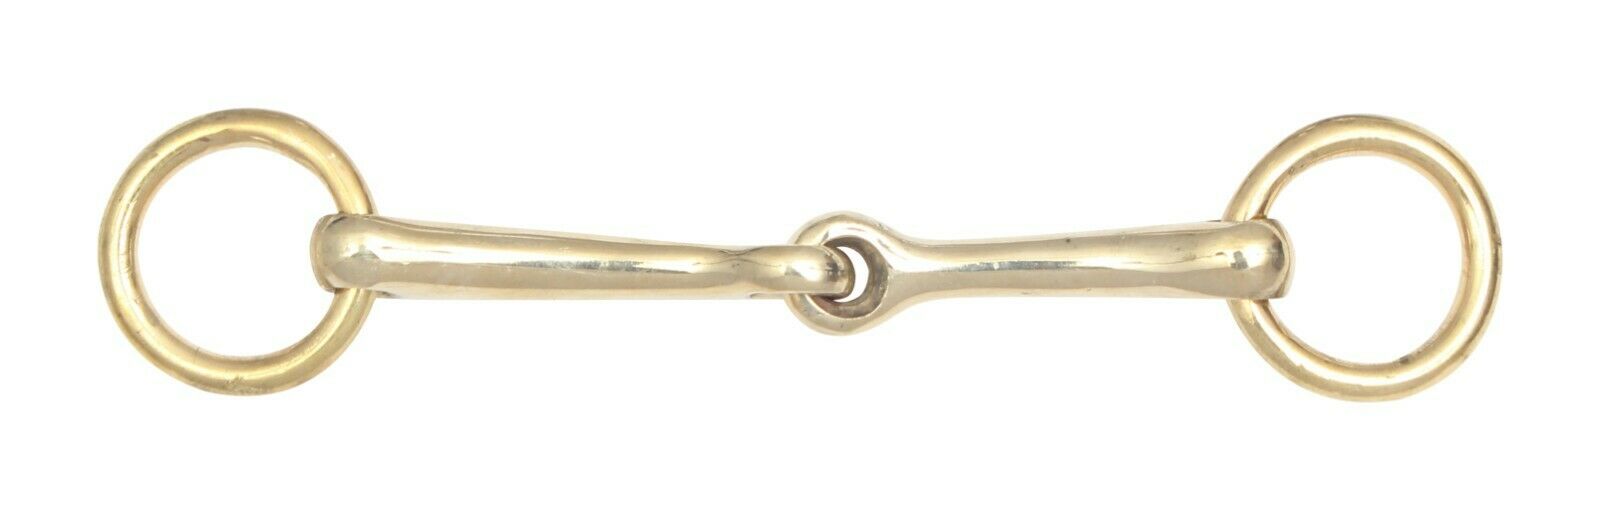 CaresWorth Pony Mini Horse Snaffle Bit Stainless Steel Silver and Gold